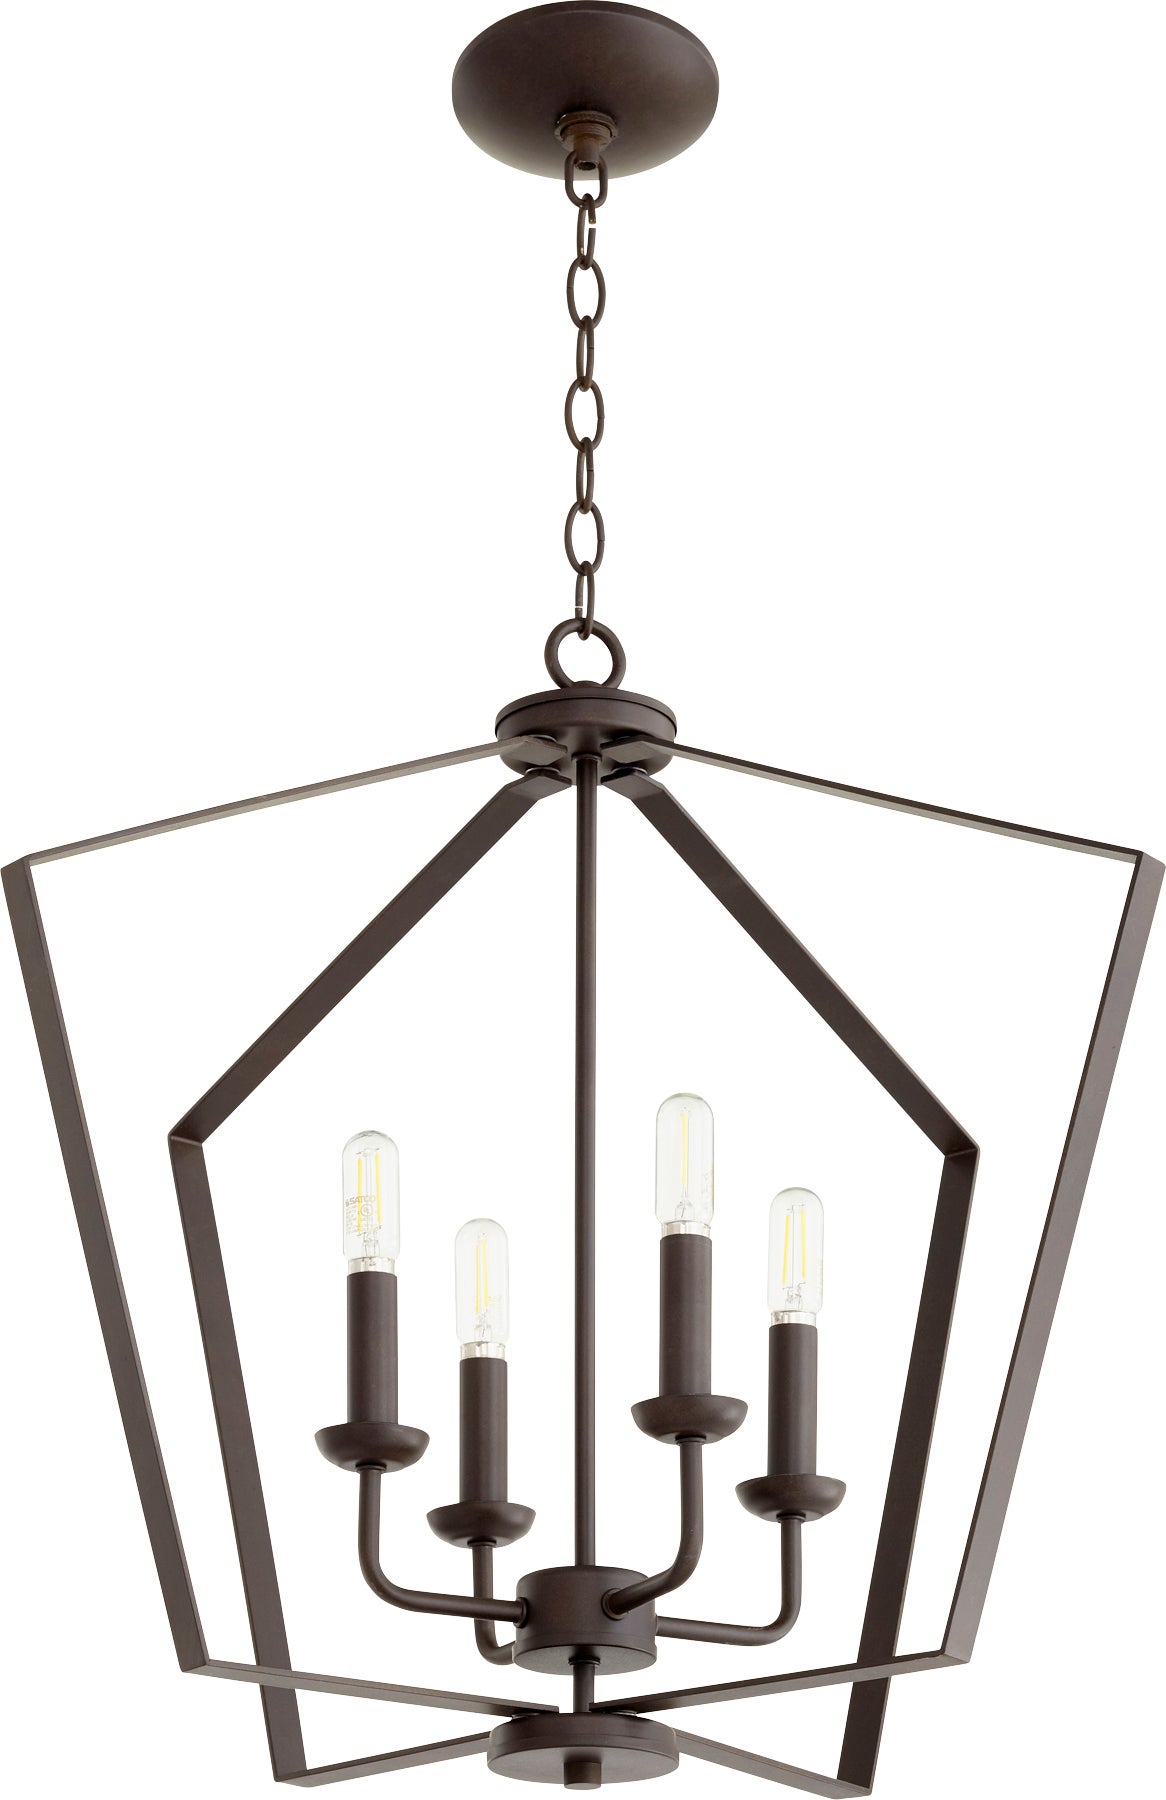 Quorum 6711-4-62 Transitional Four Light Entry Pendant from Richmond Collection in Polished Nickel Finish,